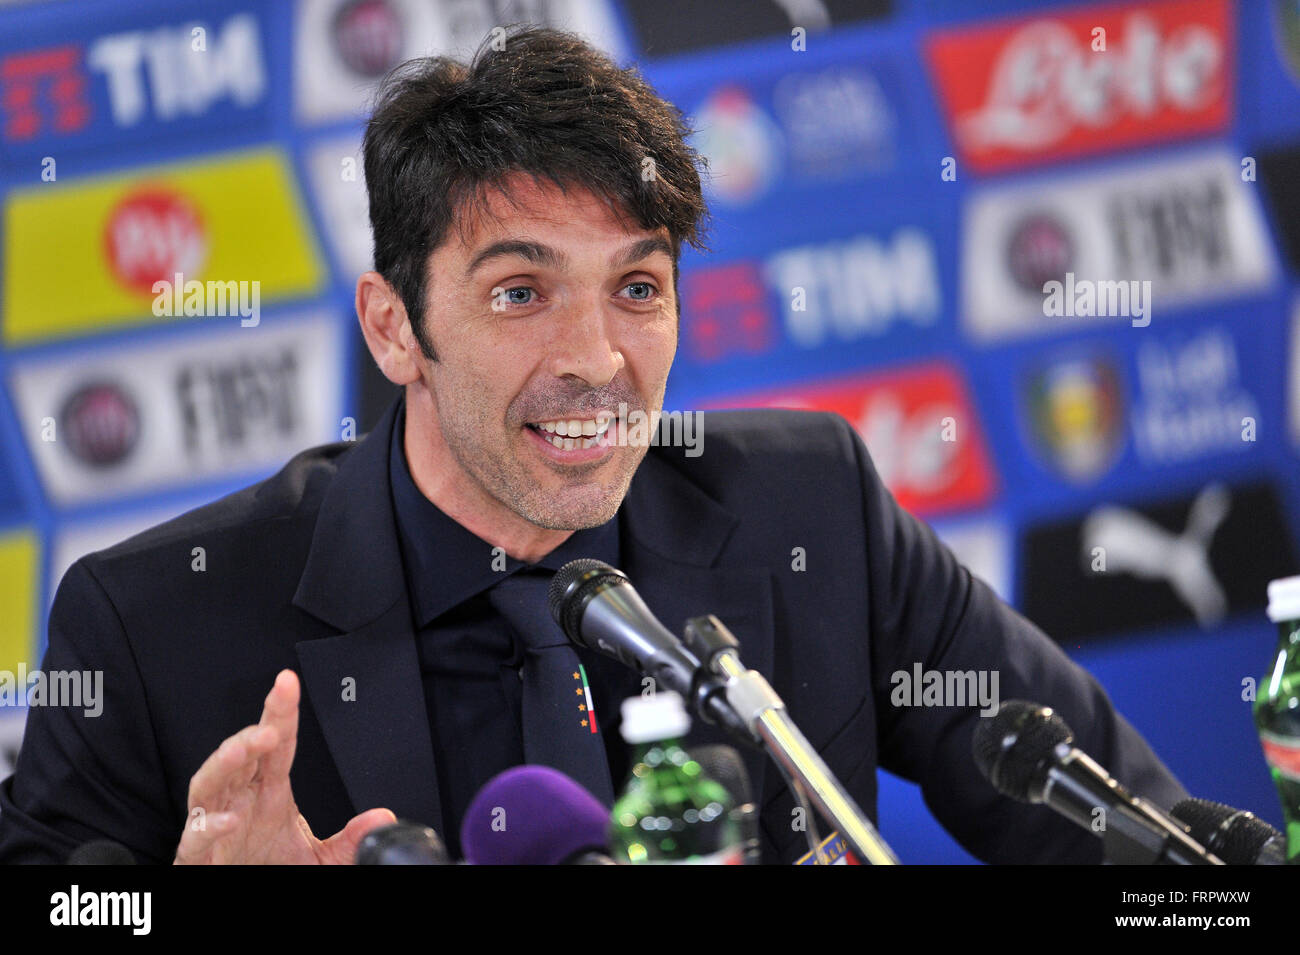 Udine, Italy. 23rd March, 2016. Italy's goalkeeper Gianluigi Buffon (Juventus)  during the press conference for the friendly football match between Italy and Spain at Dacia Arena on 23th March 2016. photo Simone Ferraro / Alamy Live News Stock Photo